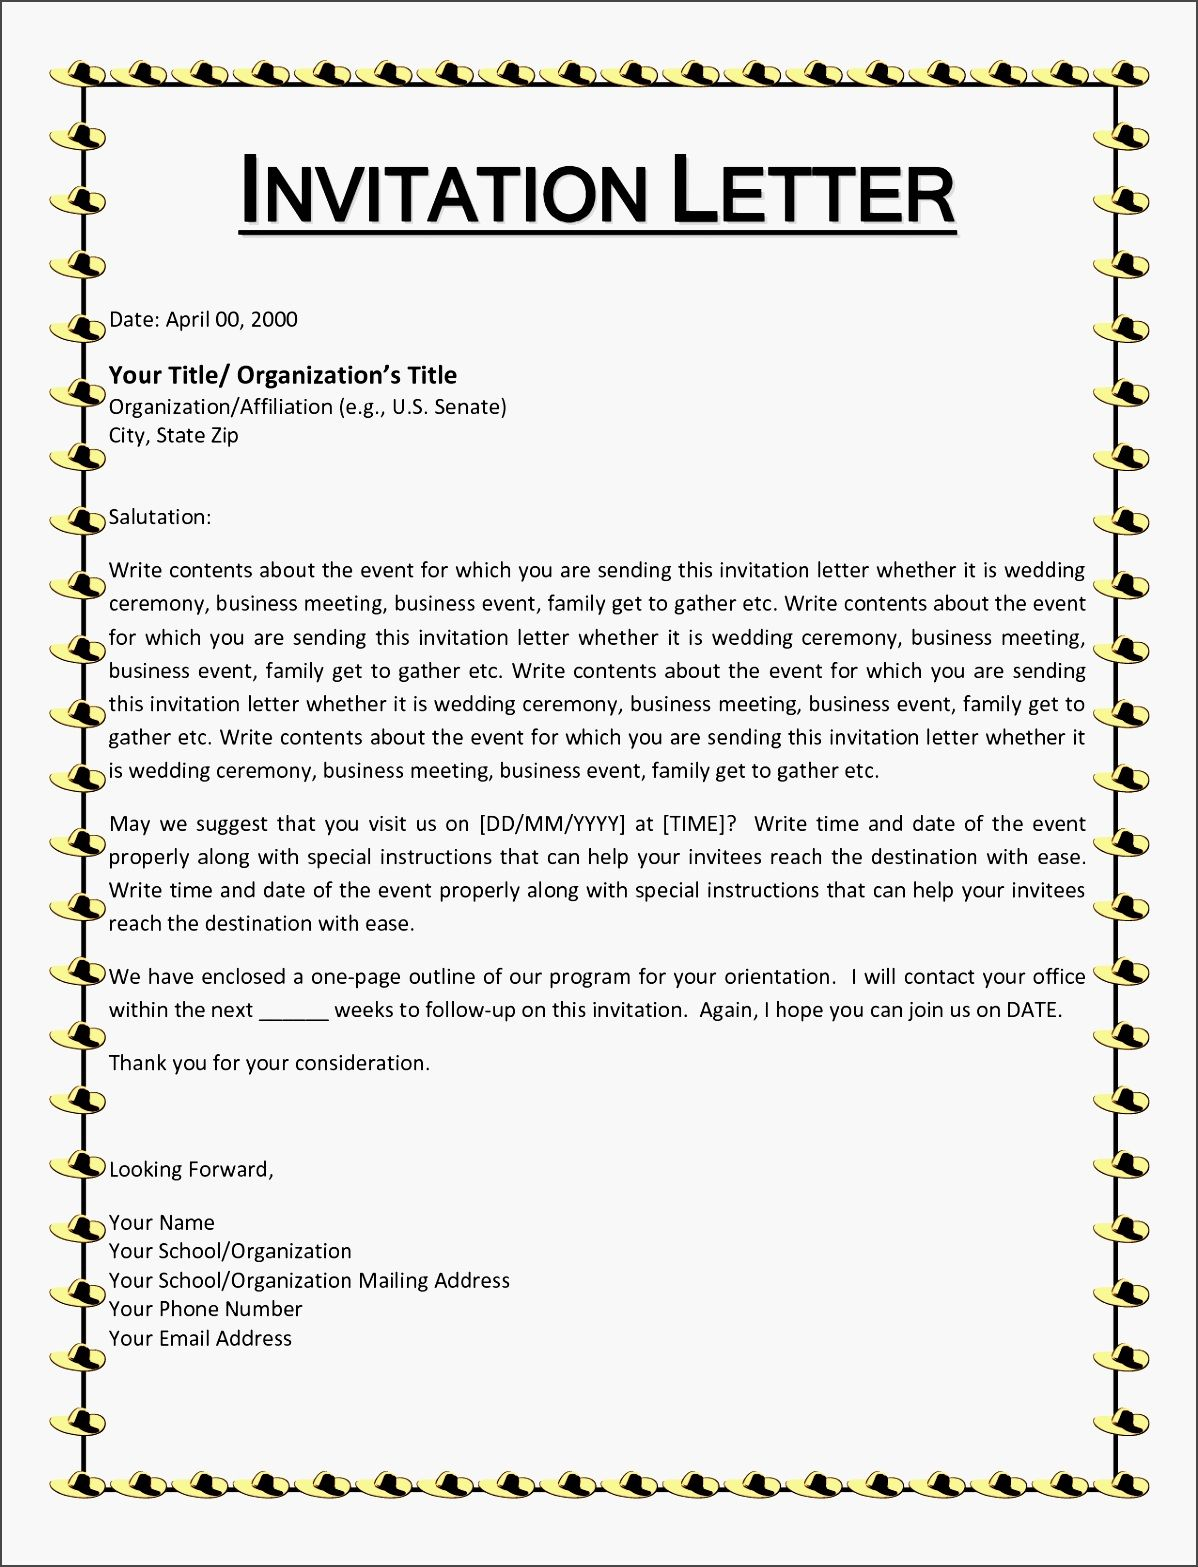 Invitation Letter Informal Saevk Beautiful Wedding Invitation Letter with dimensions 1198 X 1567